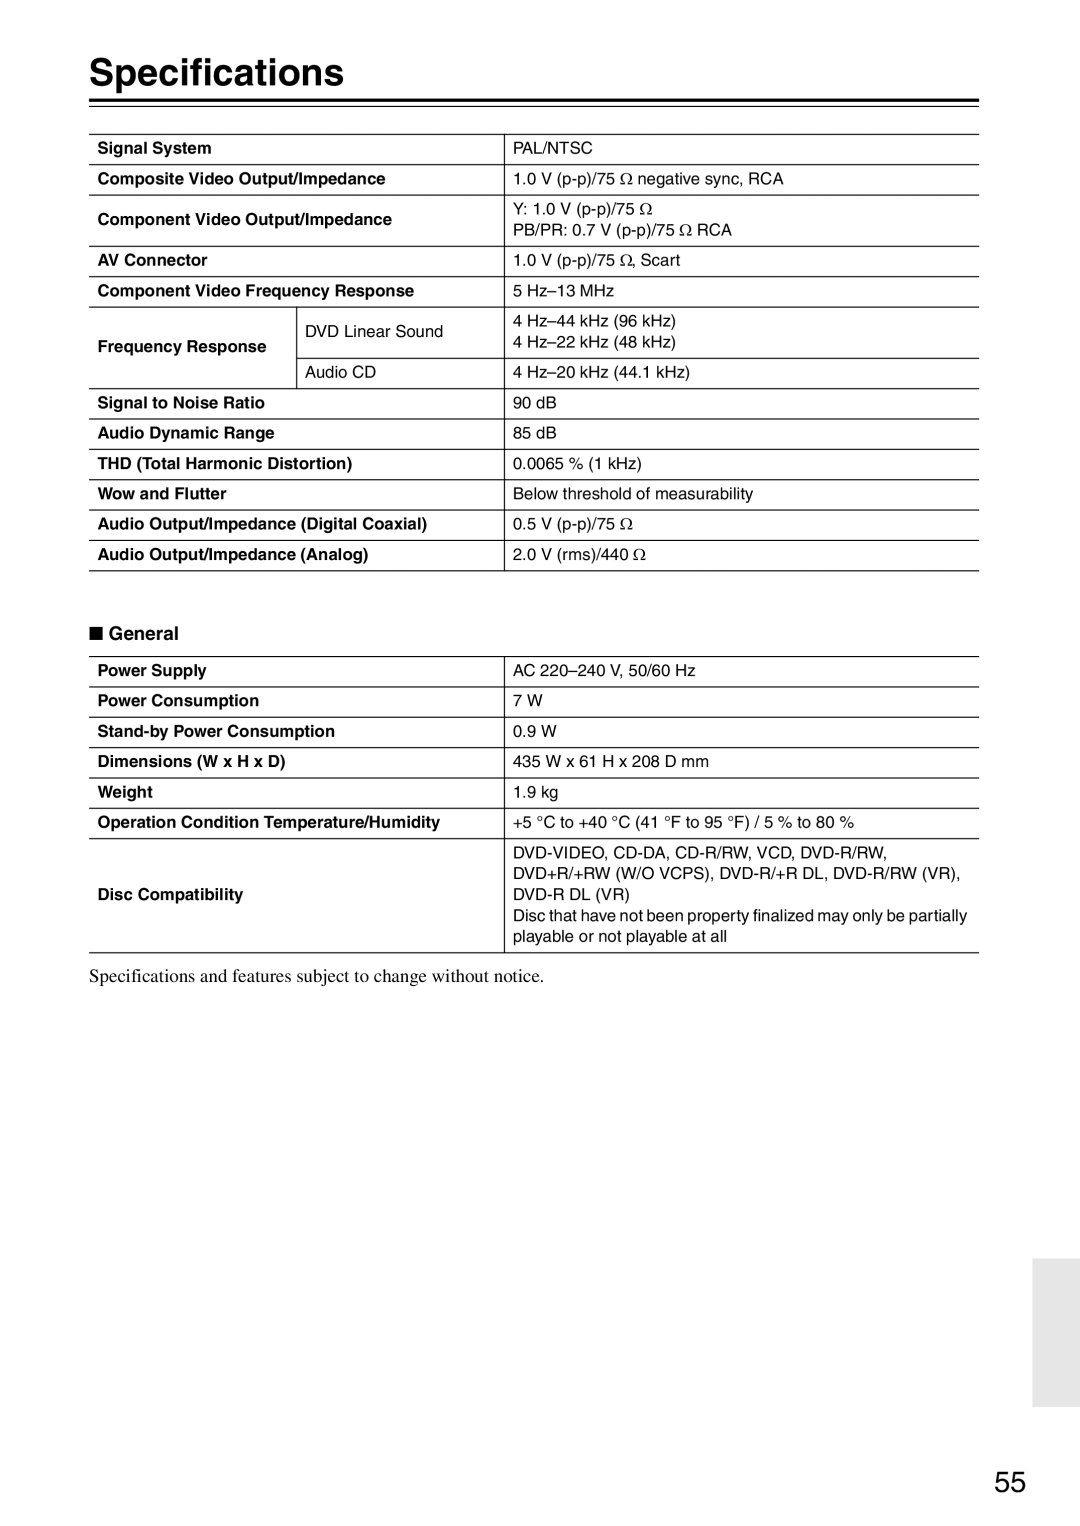 Onkyo DV-SP305 instruction manual Specifications, General 